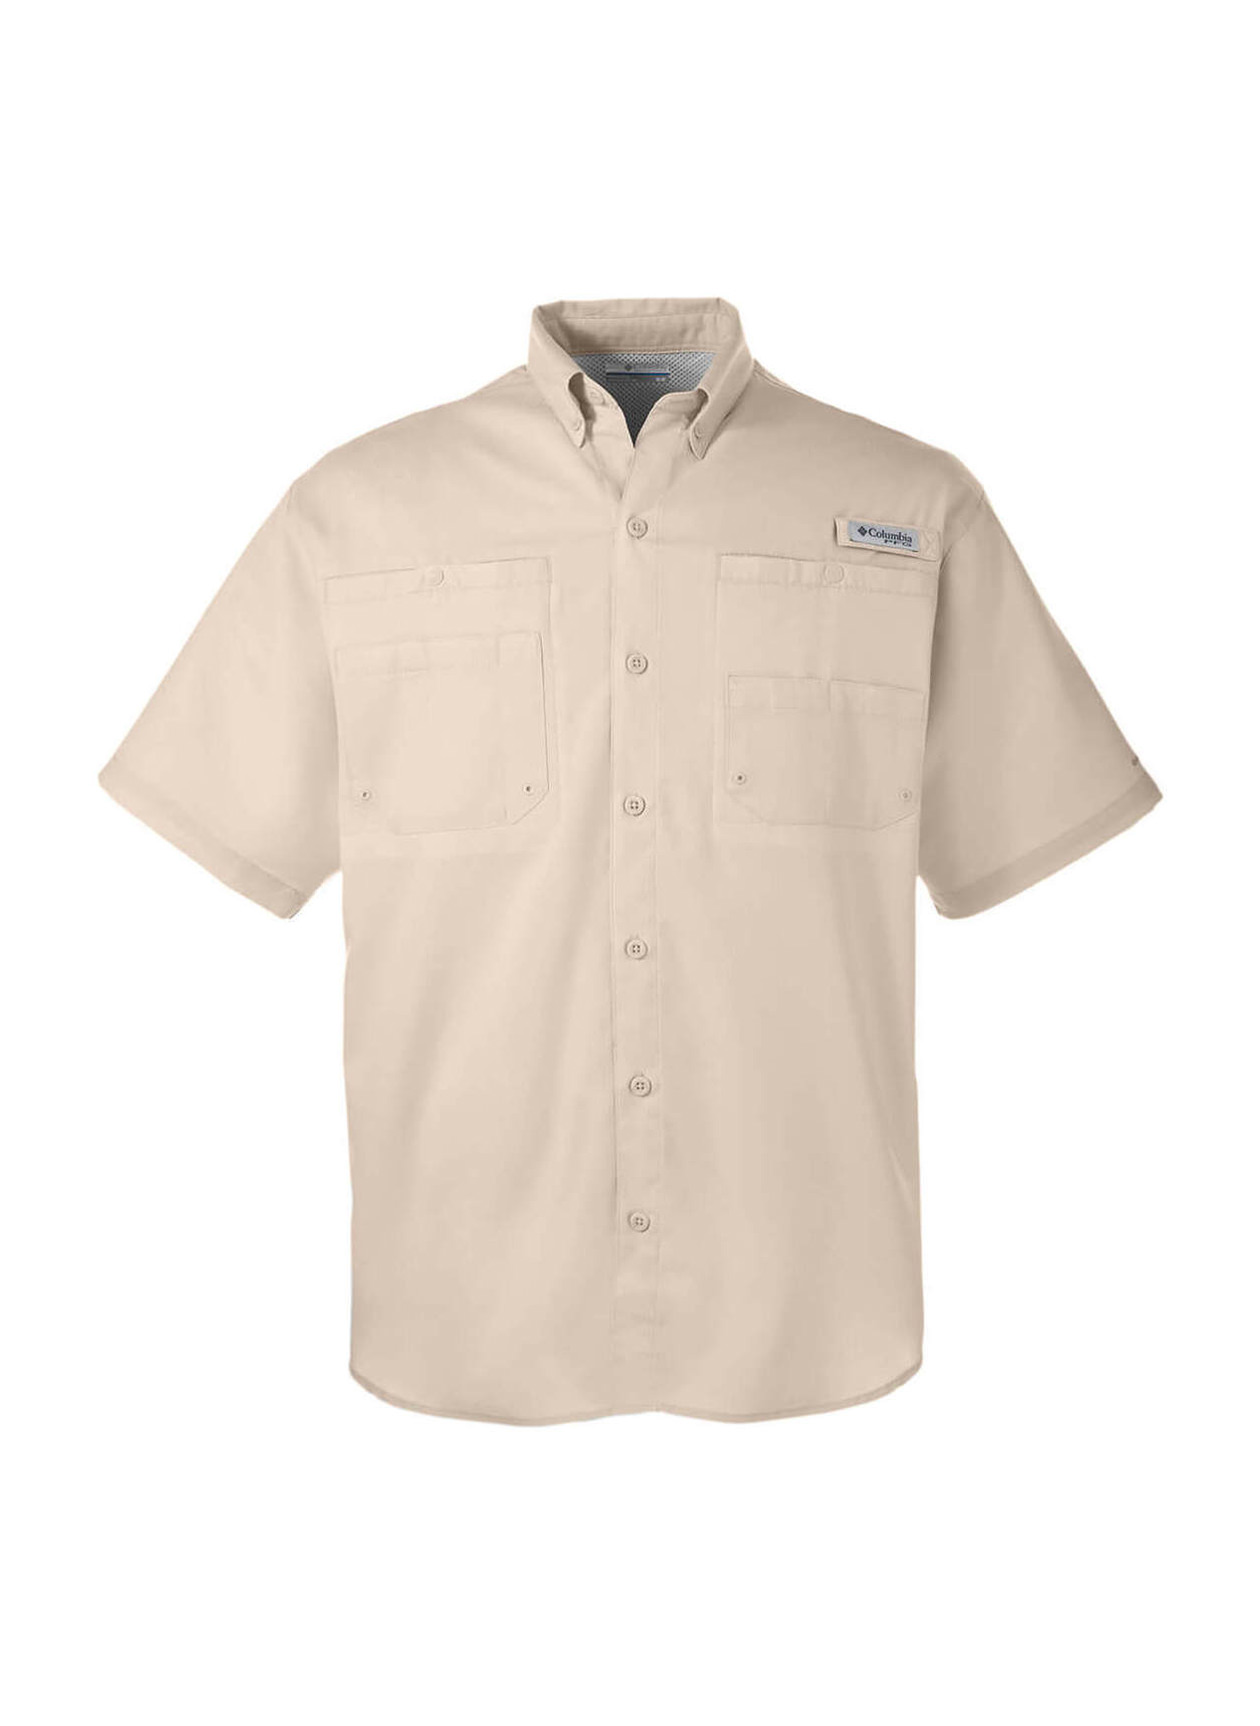 Embroidered Columbia Men's Fossil PFG Tamiami II Short-Sleeve Shirt